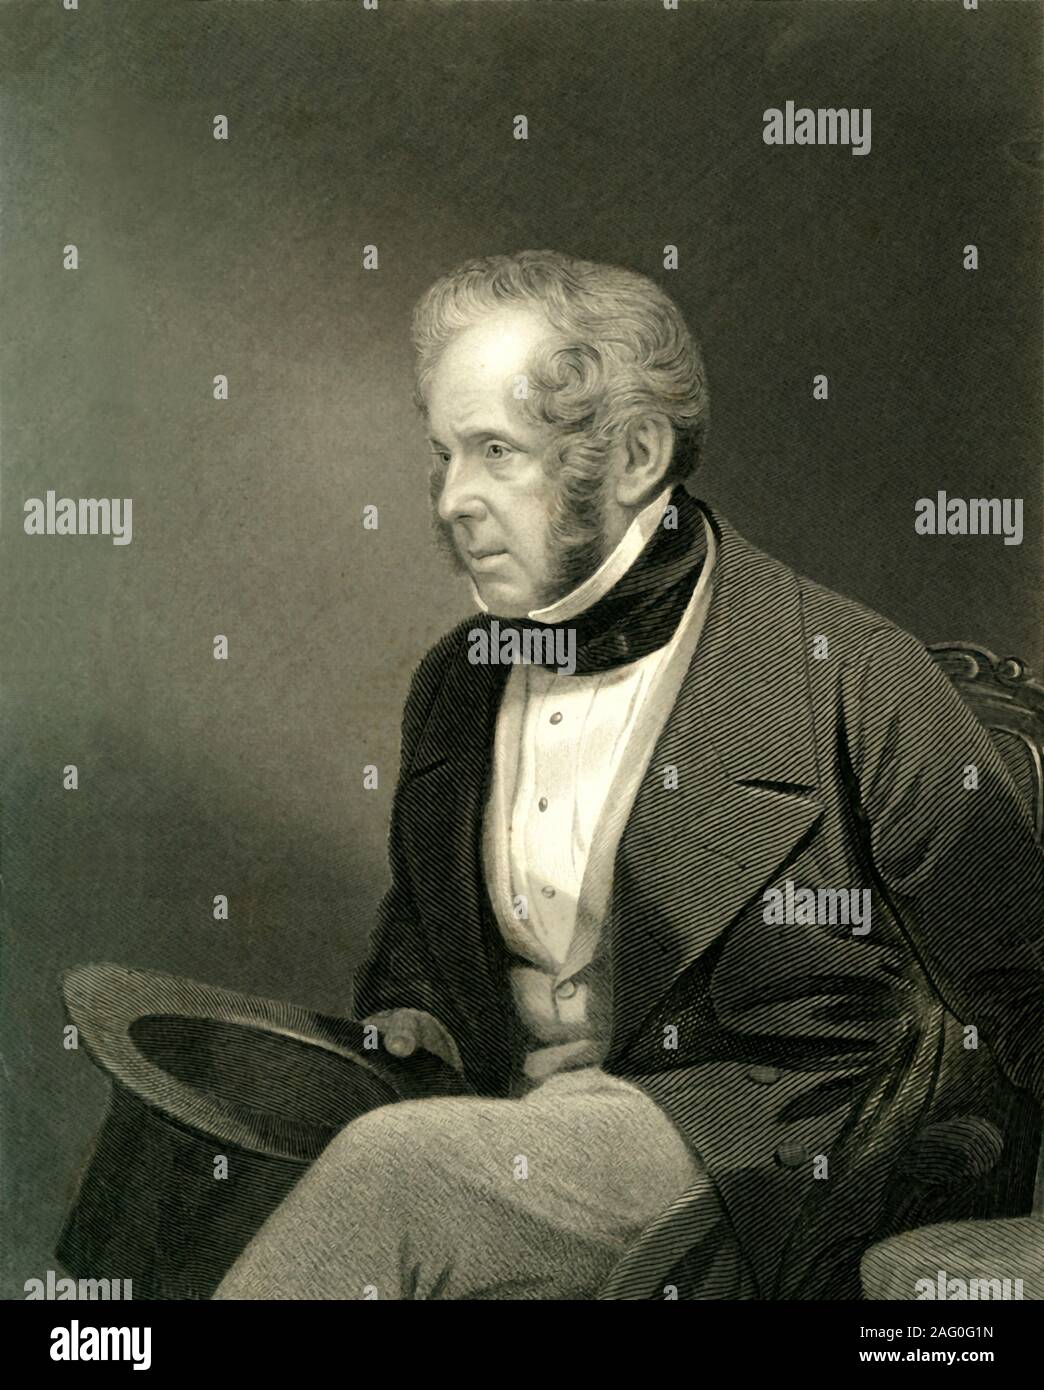 'The Right Hon. Viscount Palmerston. K.G. G.C.B.', c1872. Portrait of Henry John Temple, 3rd Viscount Palmerston (1784-1865), British statesman who served as Foreign Secretary, Home Secretary and twice as Prime Minister during the reign of Queen Victoria. From &quot;The Franco-Prussian War: its causes, incidents and consequences&quot;, Volume I, by Captain H M Hozier. [William Mackenzie, London, 1872] Stock Photo